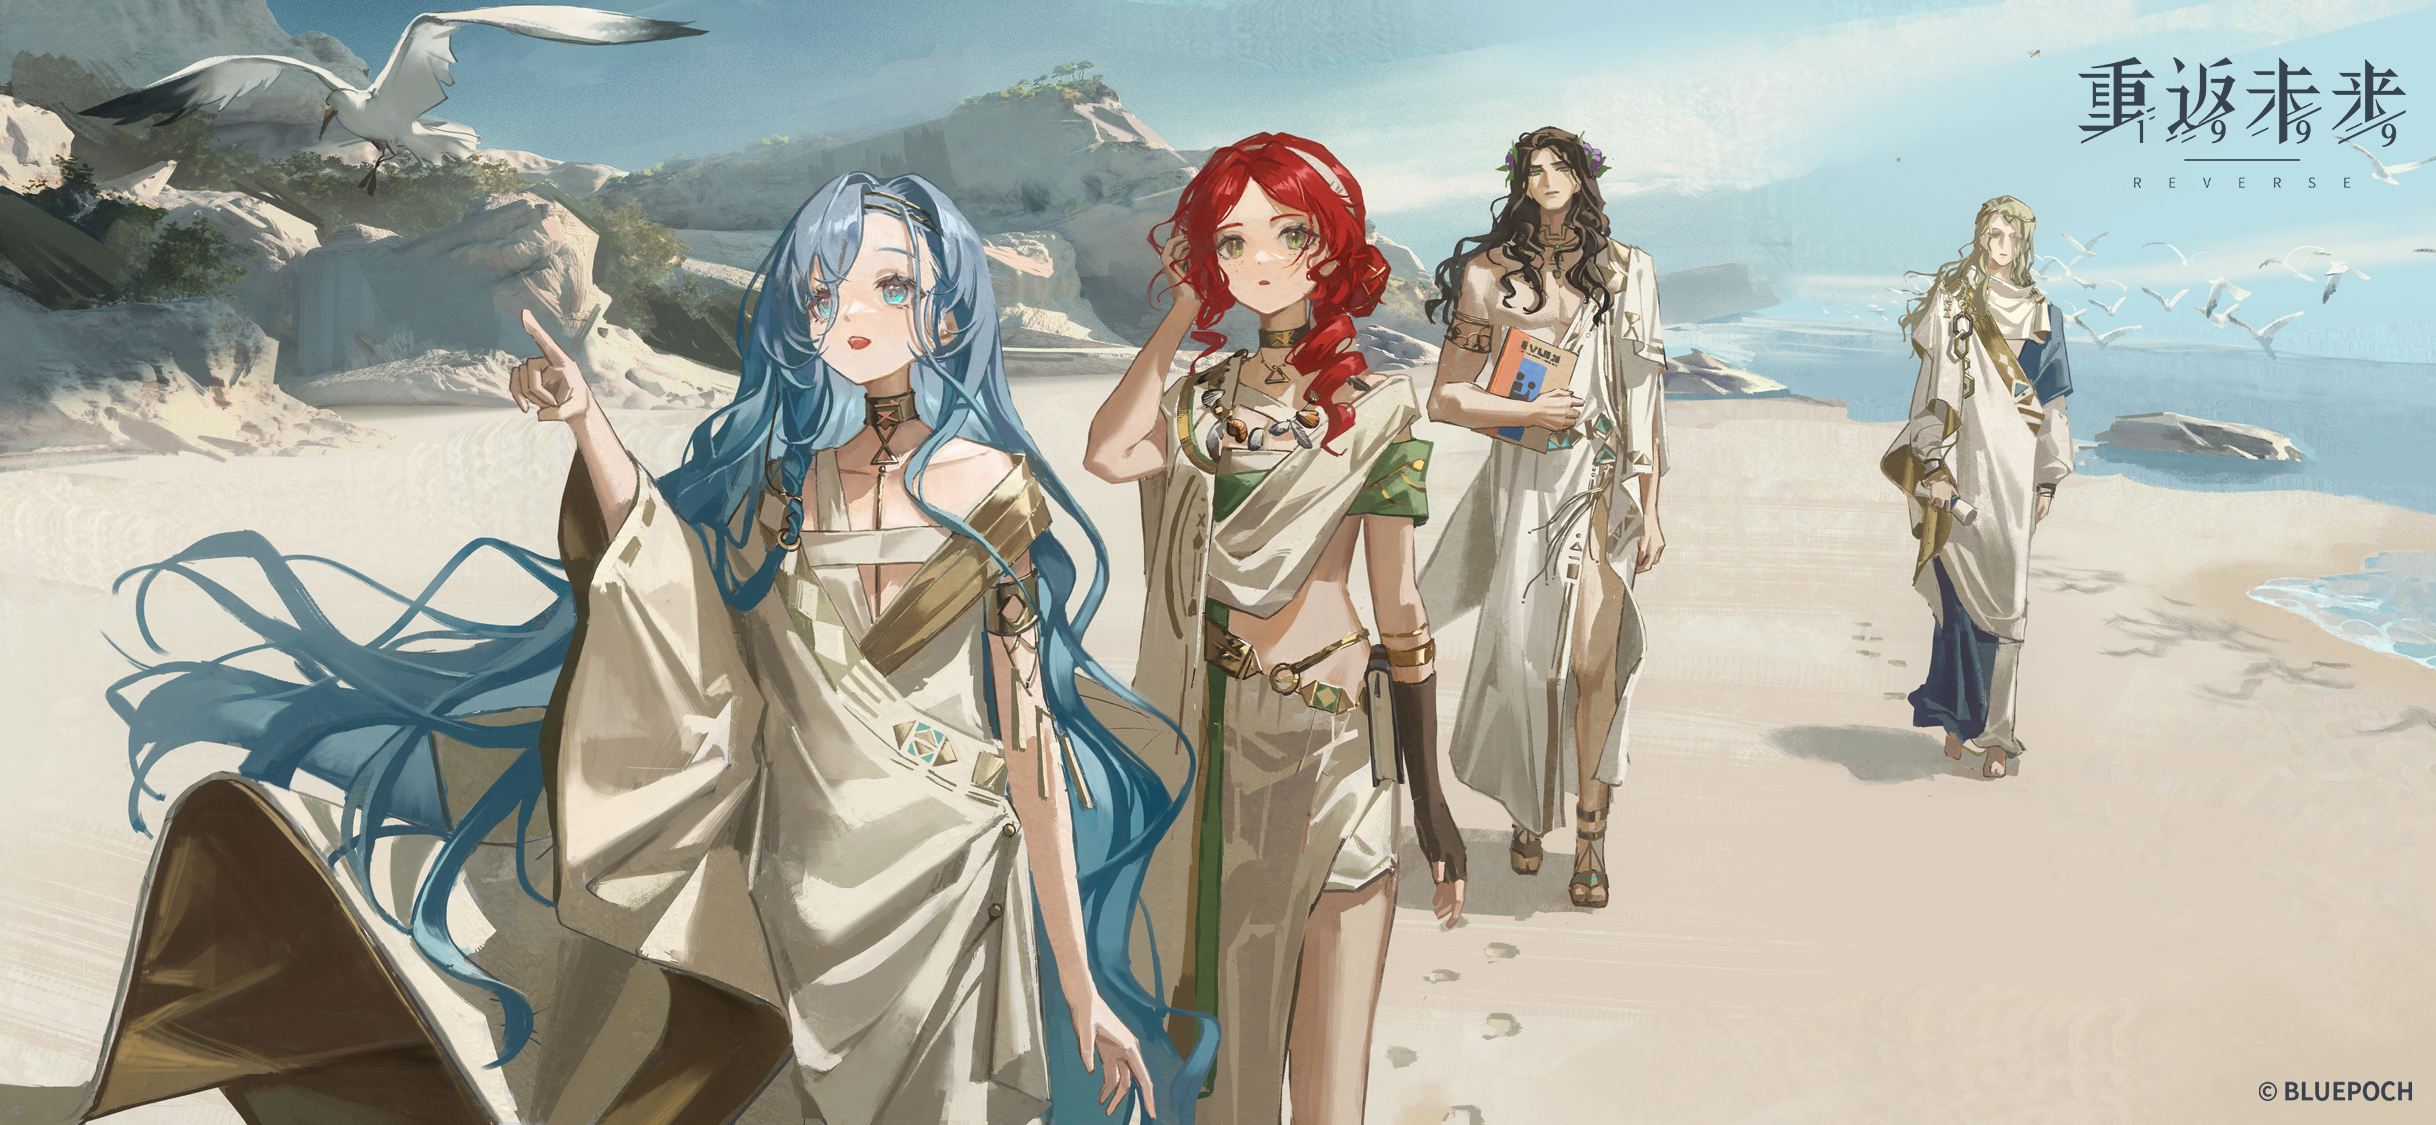 Anime 2436x1125 Bluepoch anime girls anime boys 37 (Reverse: 1999) beach 210 (Reverse:1999) birds 6 (Reverse:1999) seagulls Sophia (Reverse: 1999) sea outdoors finger pointing ancient Greek clothes cliff group of people circlet watermarked barefoot Japanese looking up sky clouds scrolls Reverse: 1999